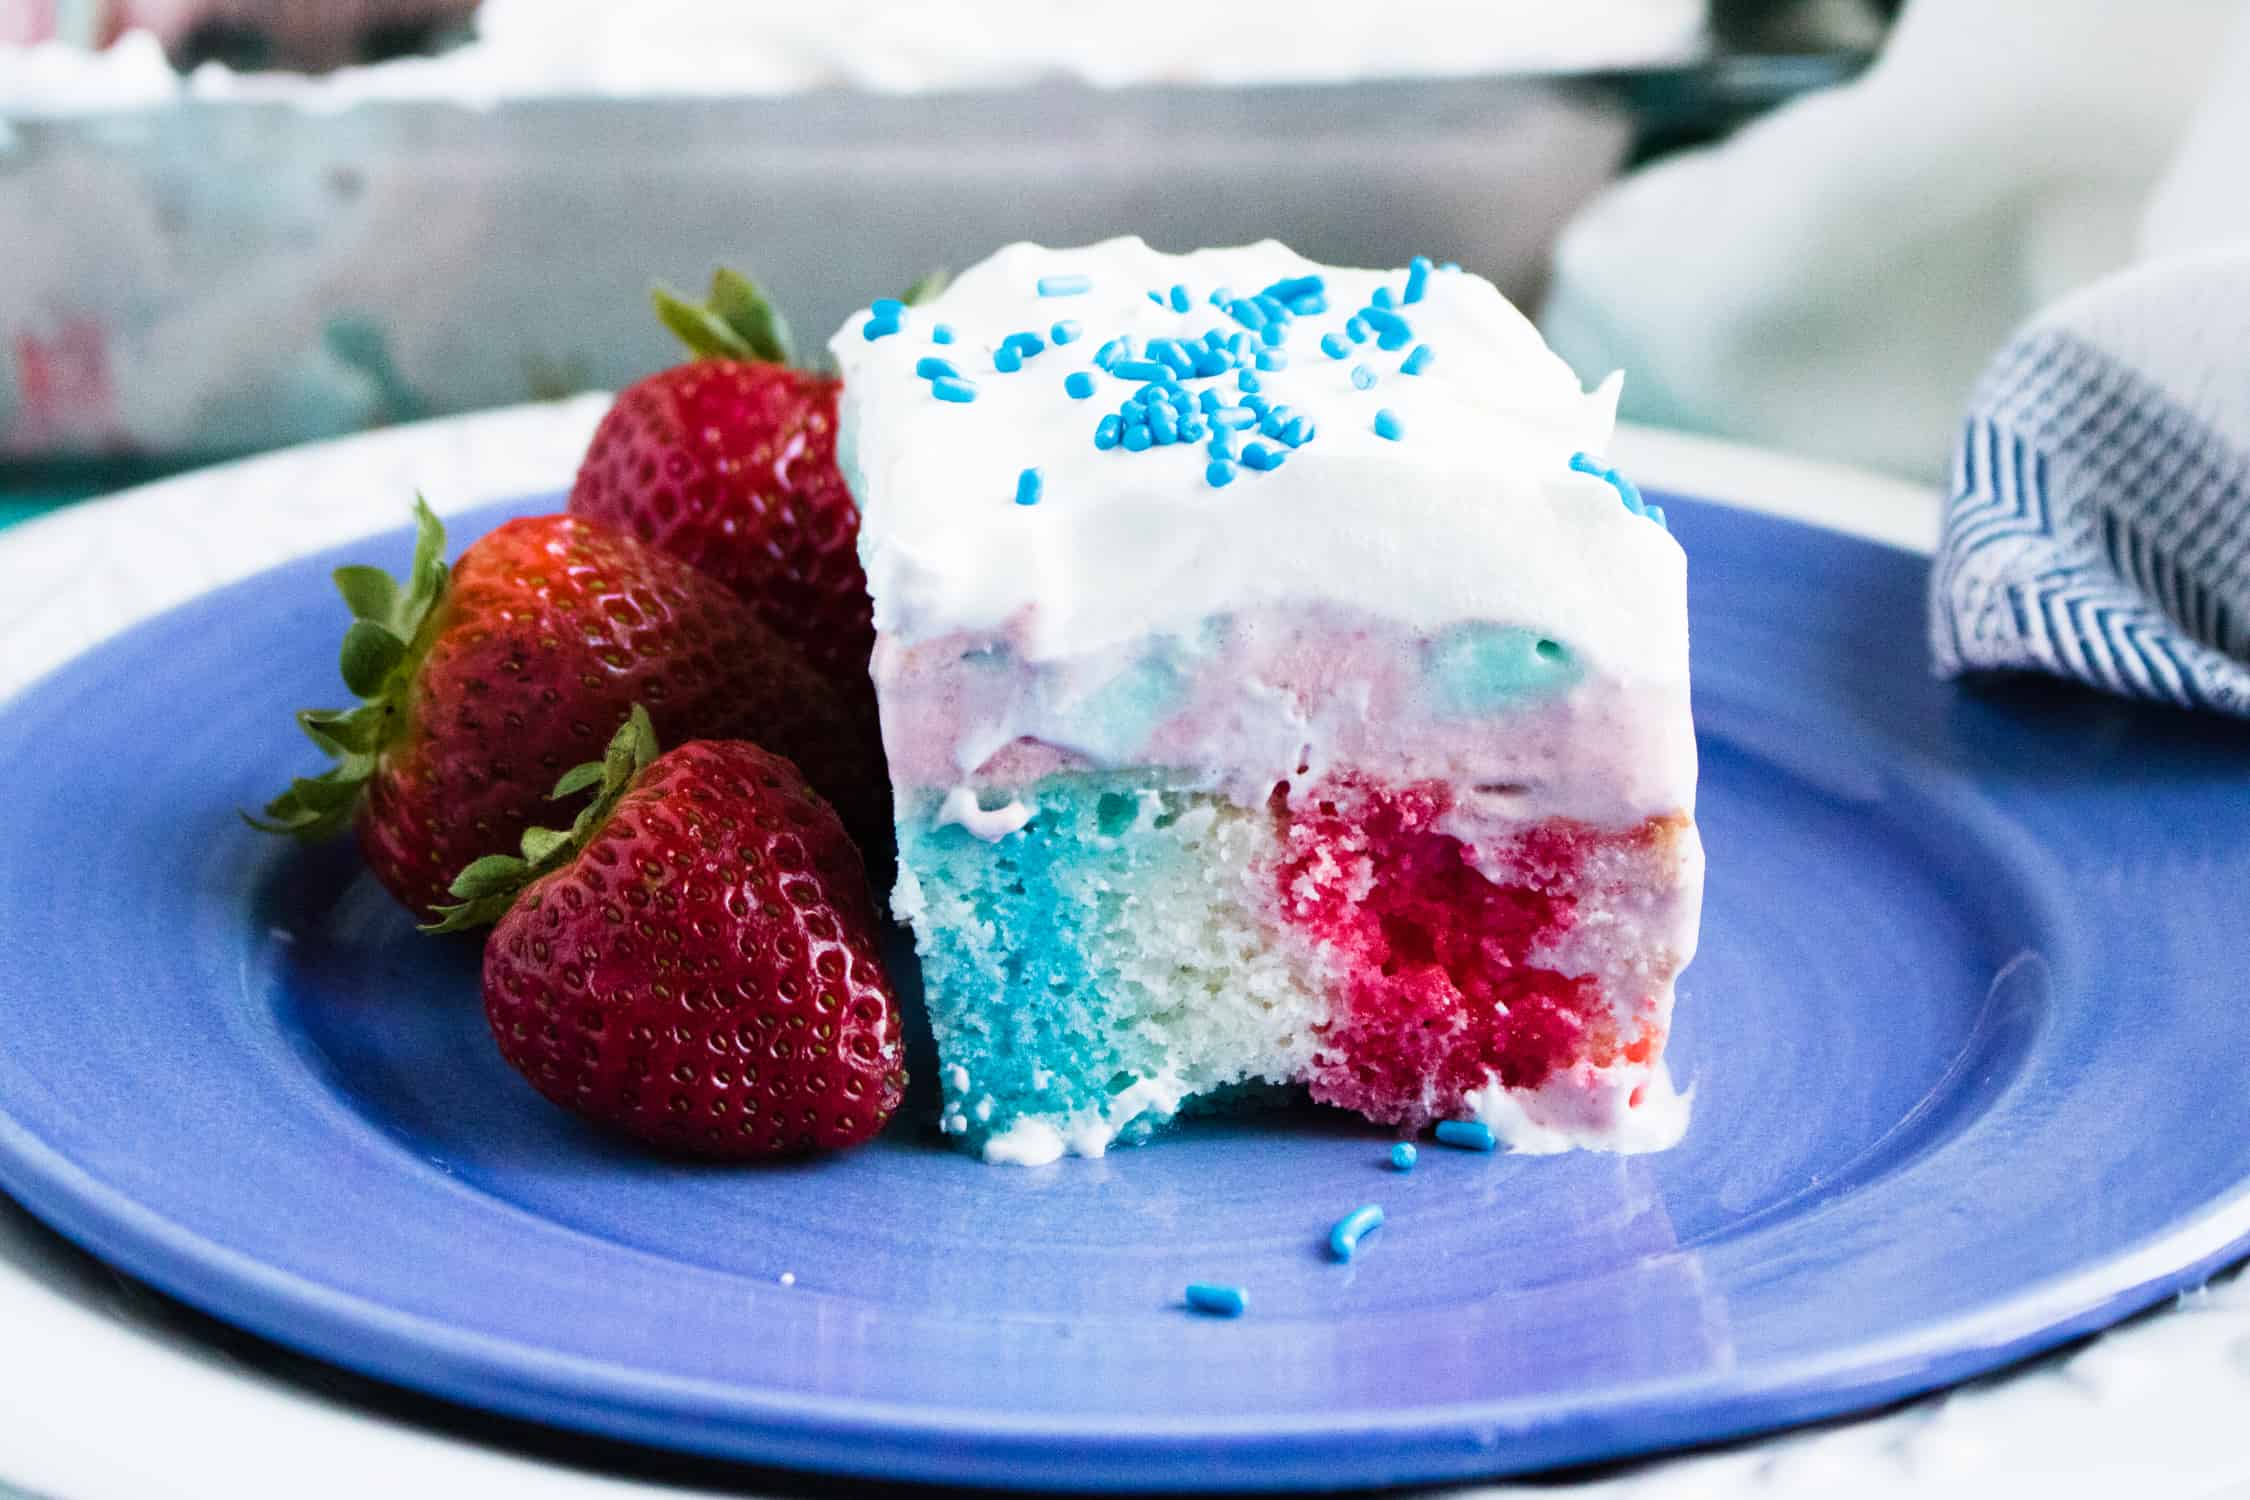 One slice of 4th of July Poke Cake with Frozen Strawberry Layer served on a blue plate and garnished with three strawberries